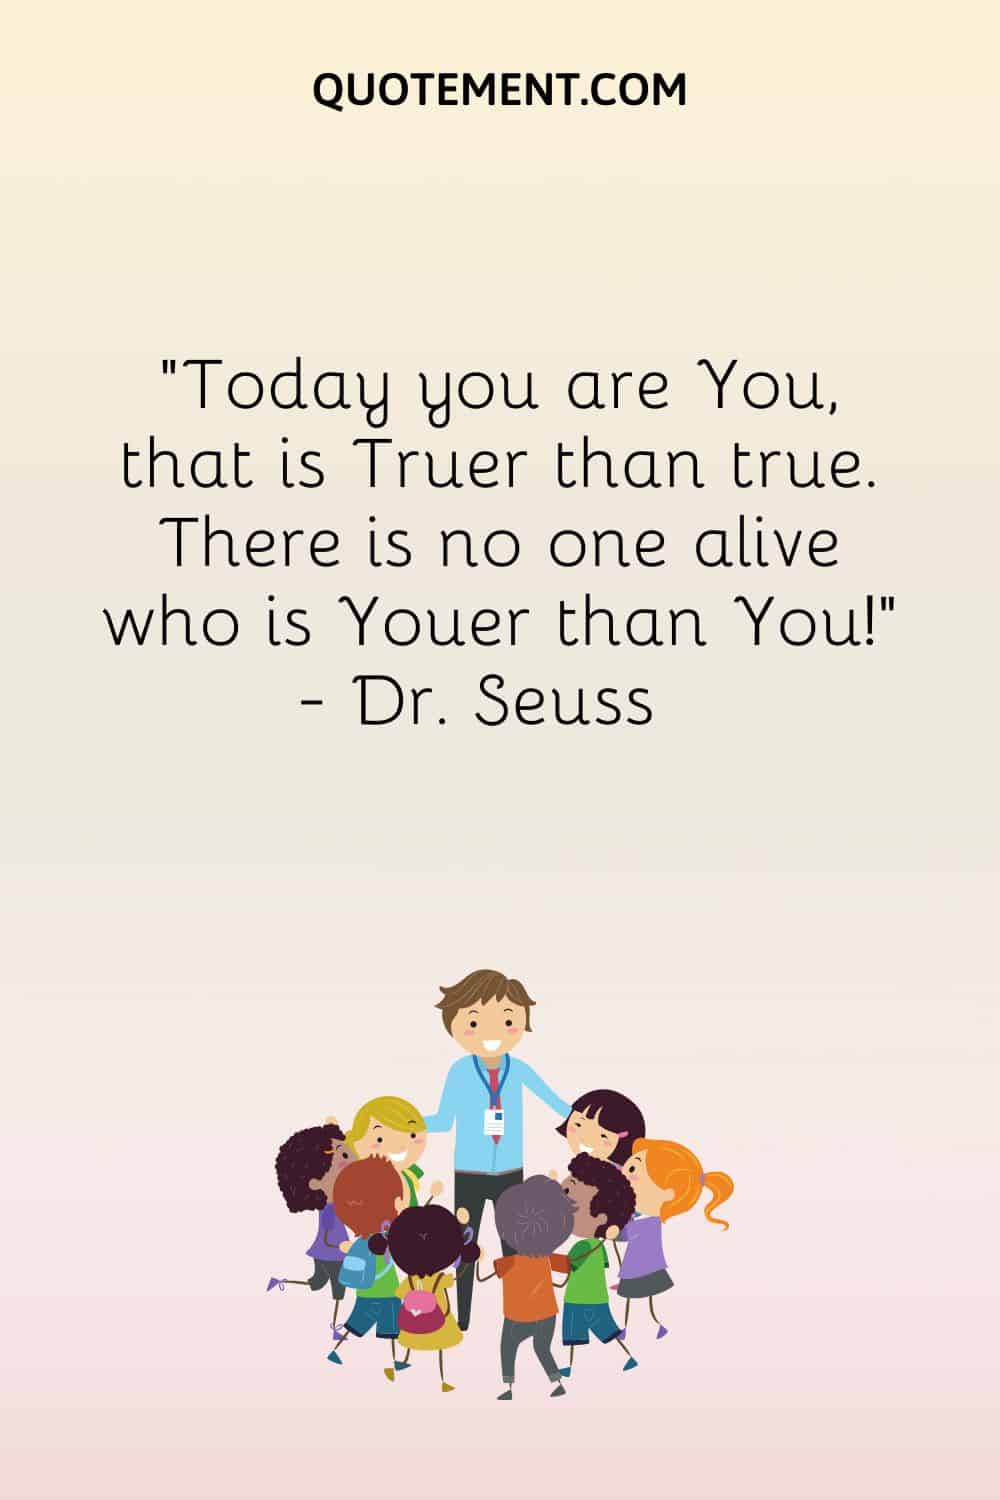 Today you are You, that is Truer than true.